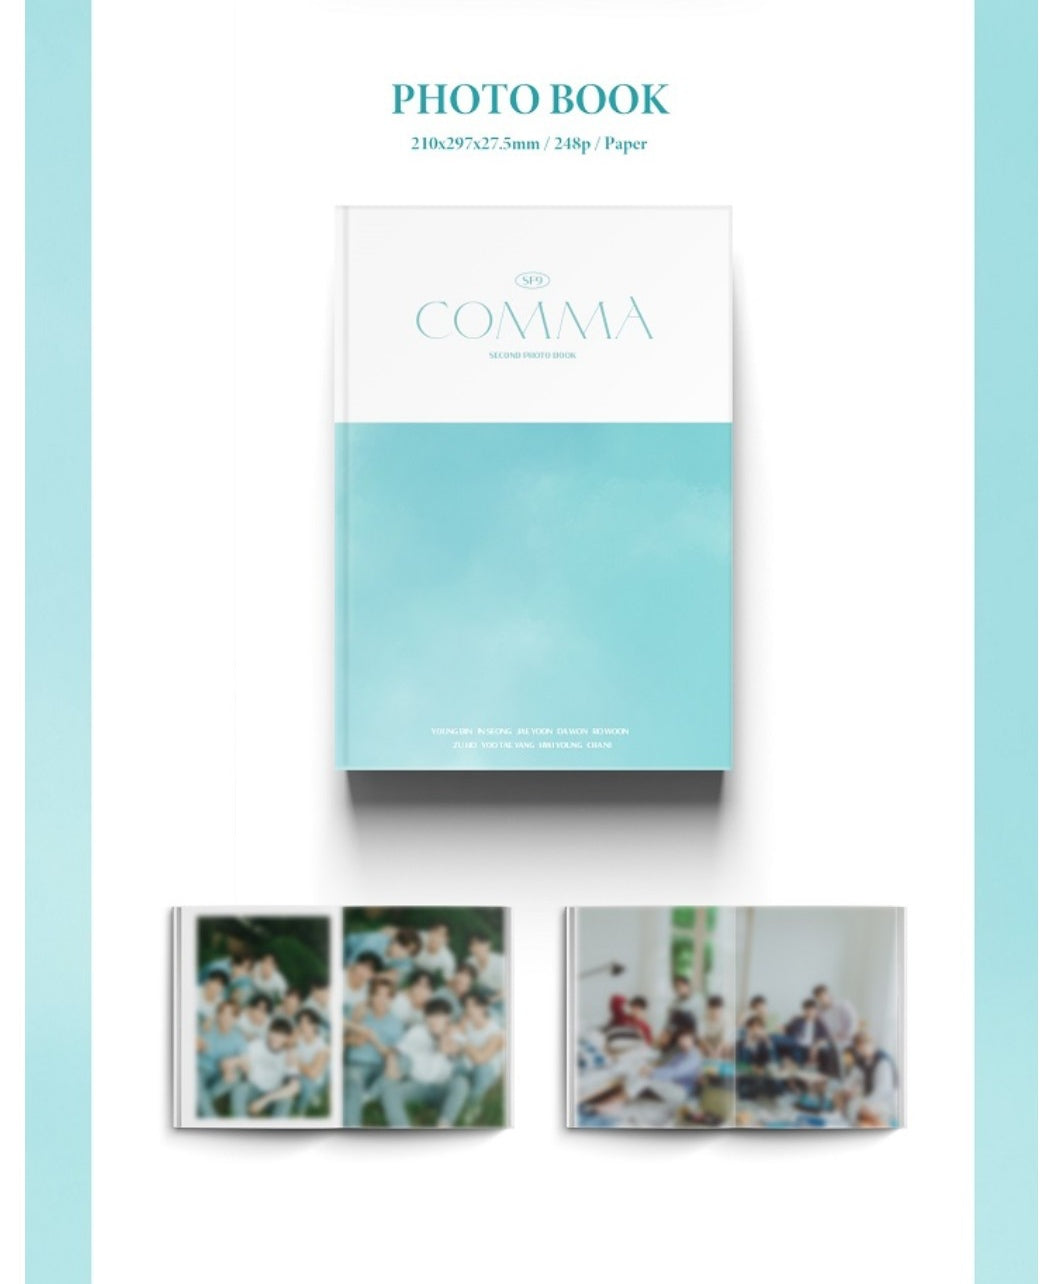 [PREORDER] SF9 - 2ND PHOTO BOOK COMMA